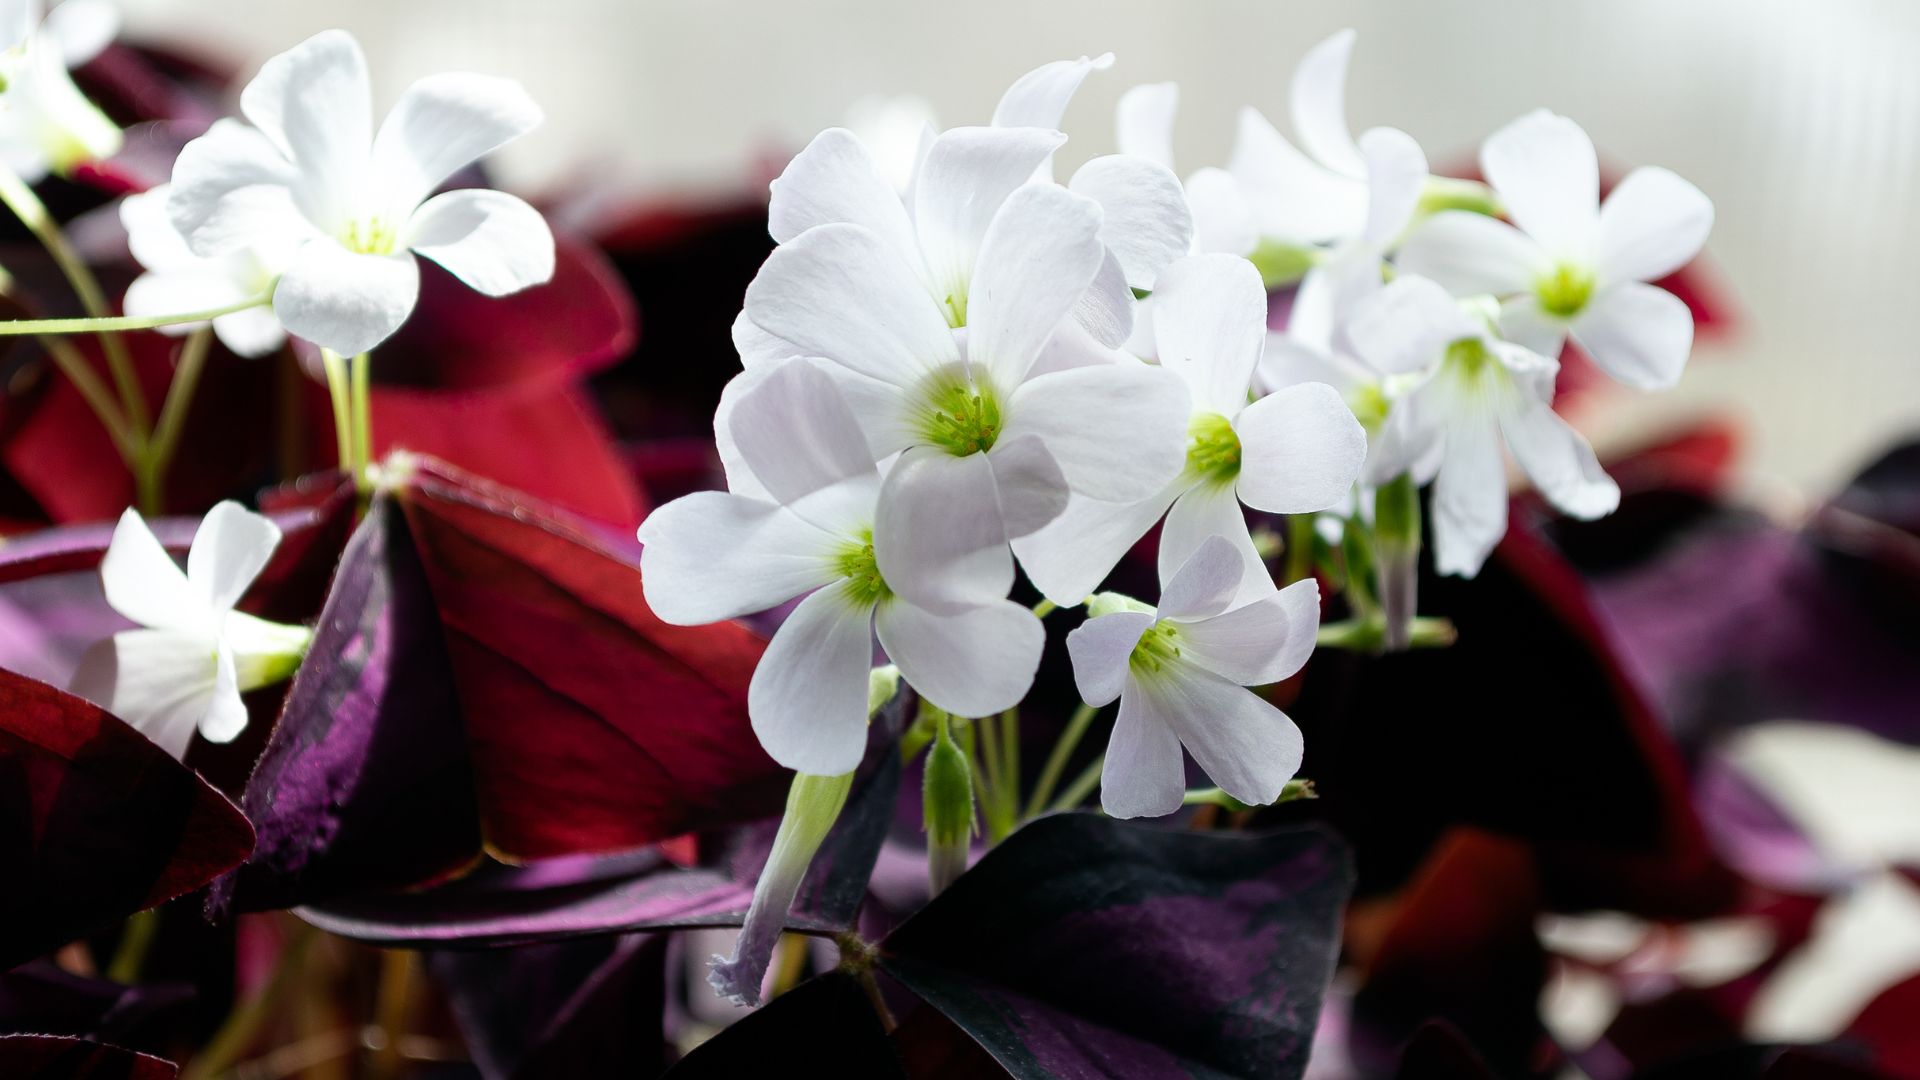 How To Grow & Care For The Oxalis Triangularis